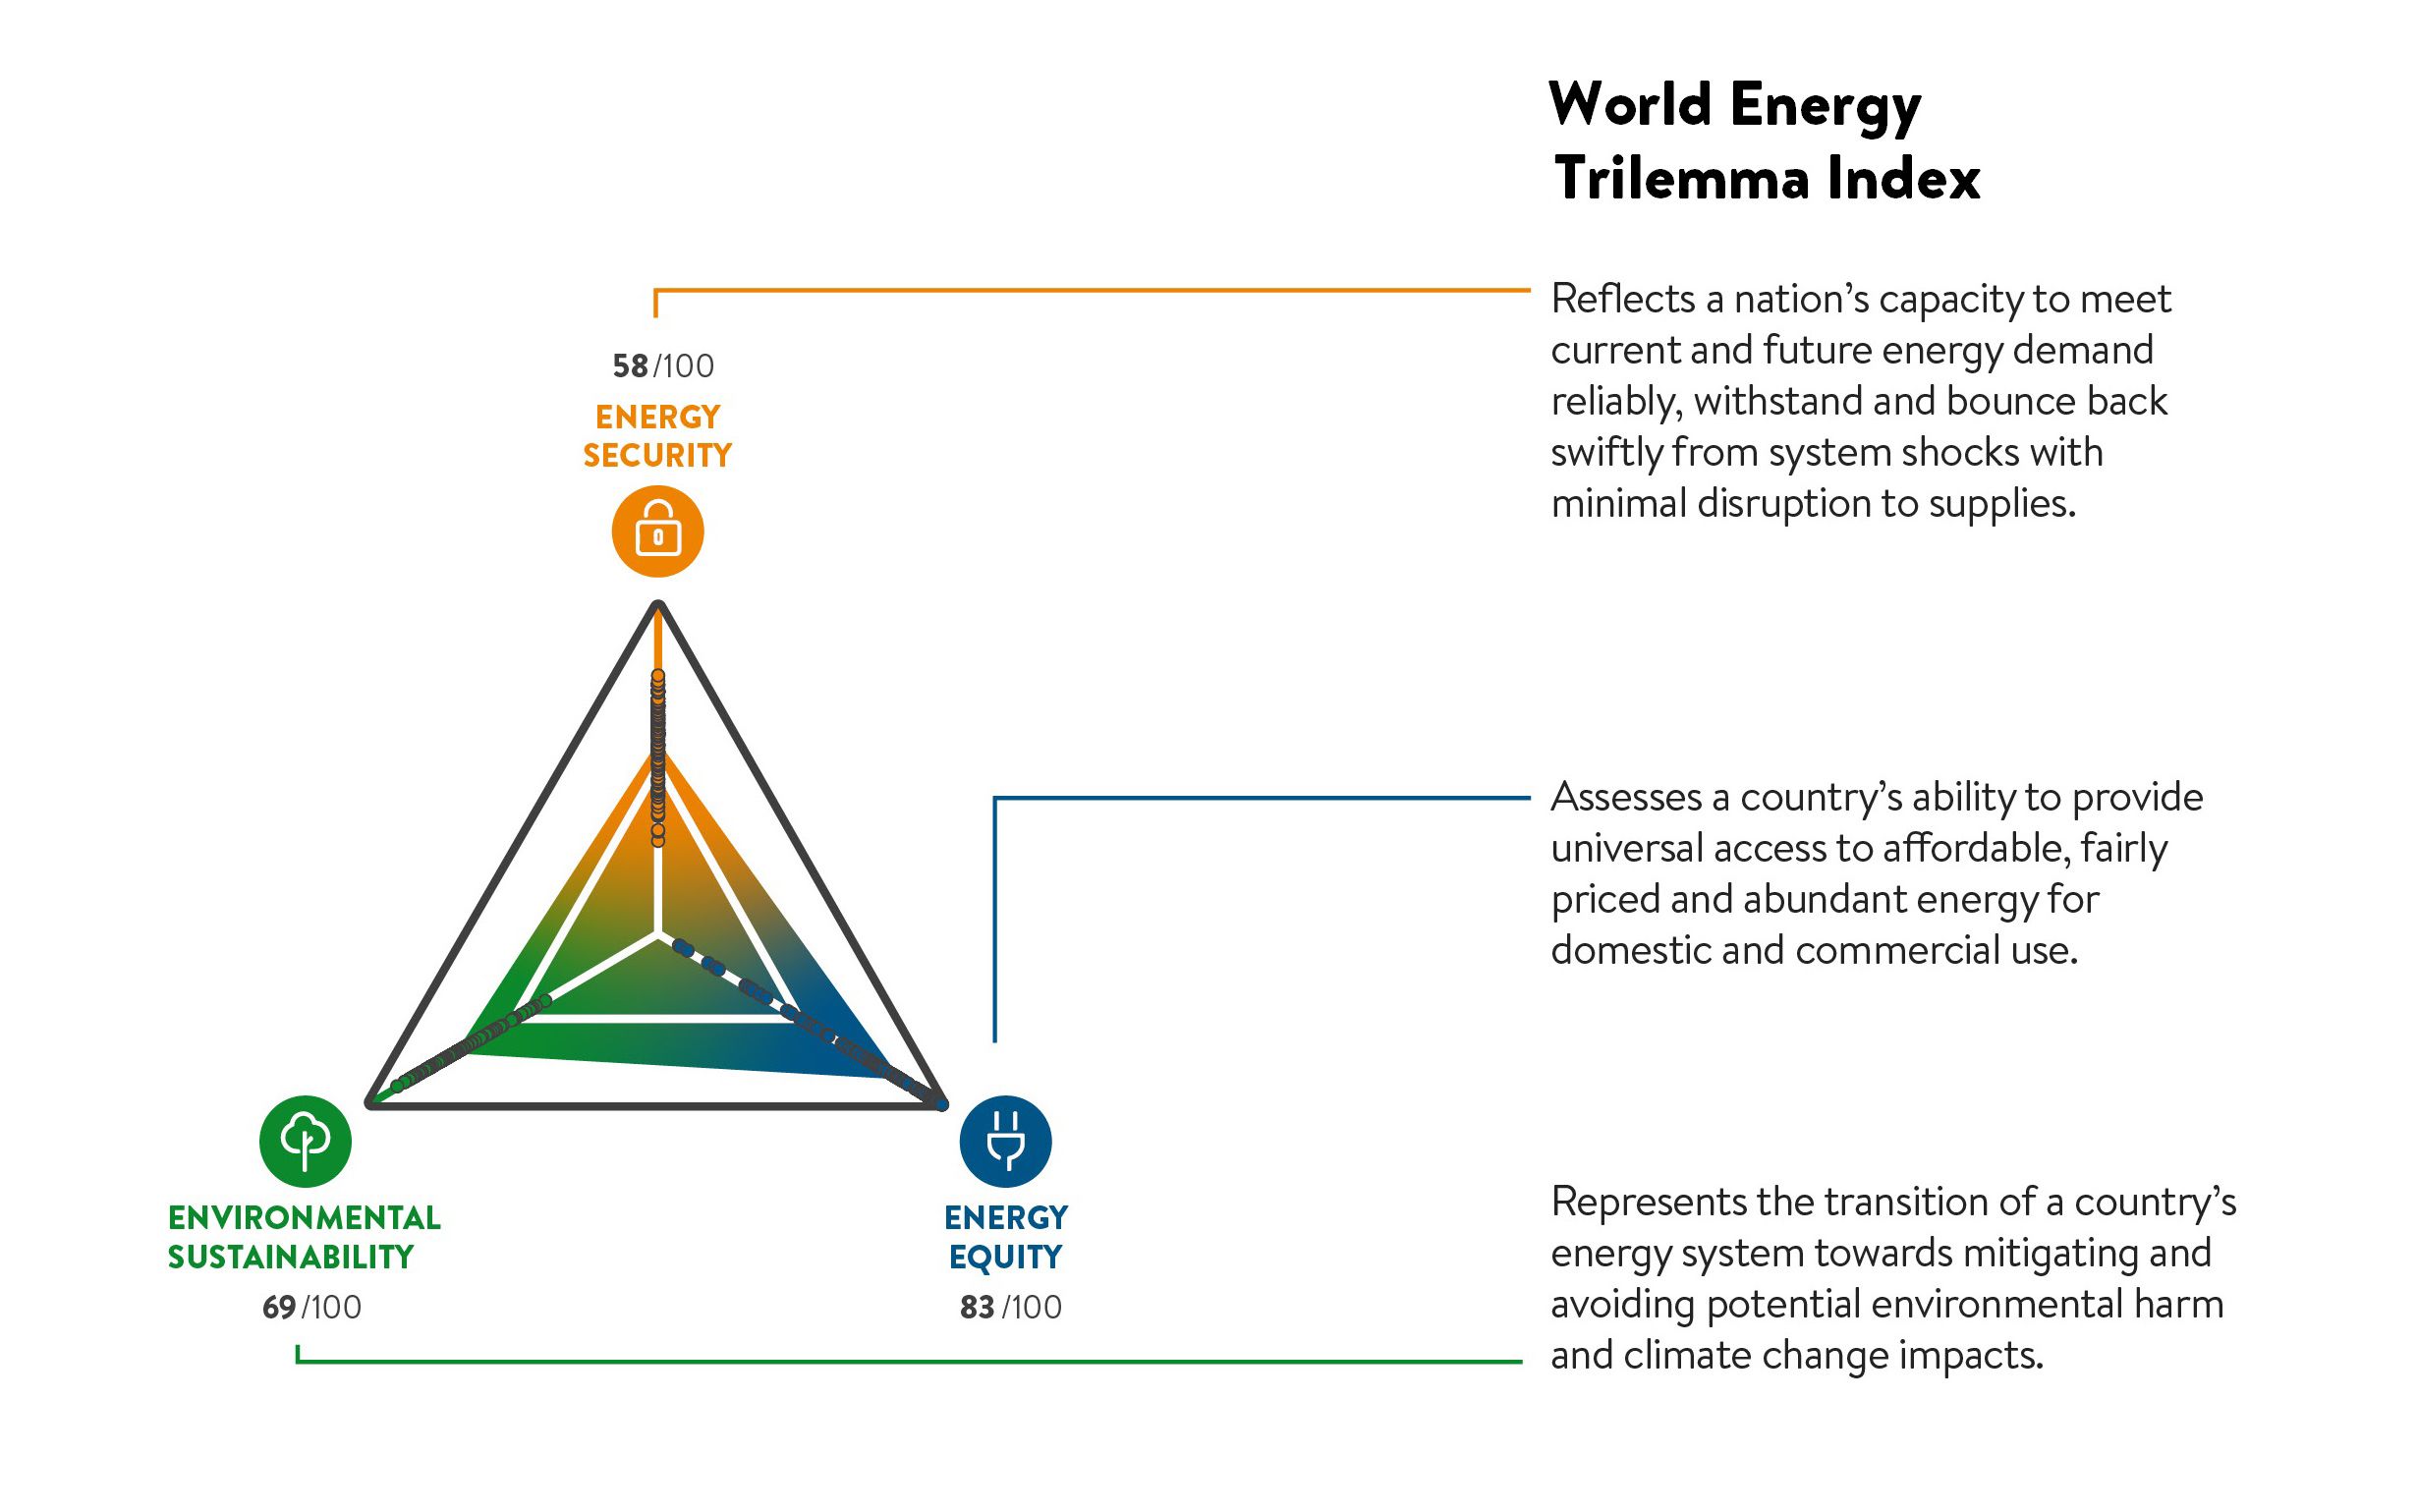 Energy Trilemma Image of a tirangle with the points representing energy security, environmental sustainability, and energy equity.